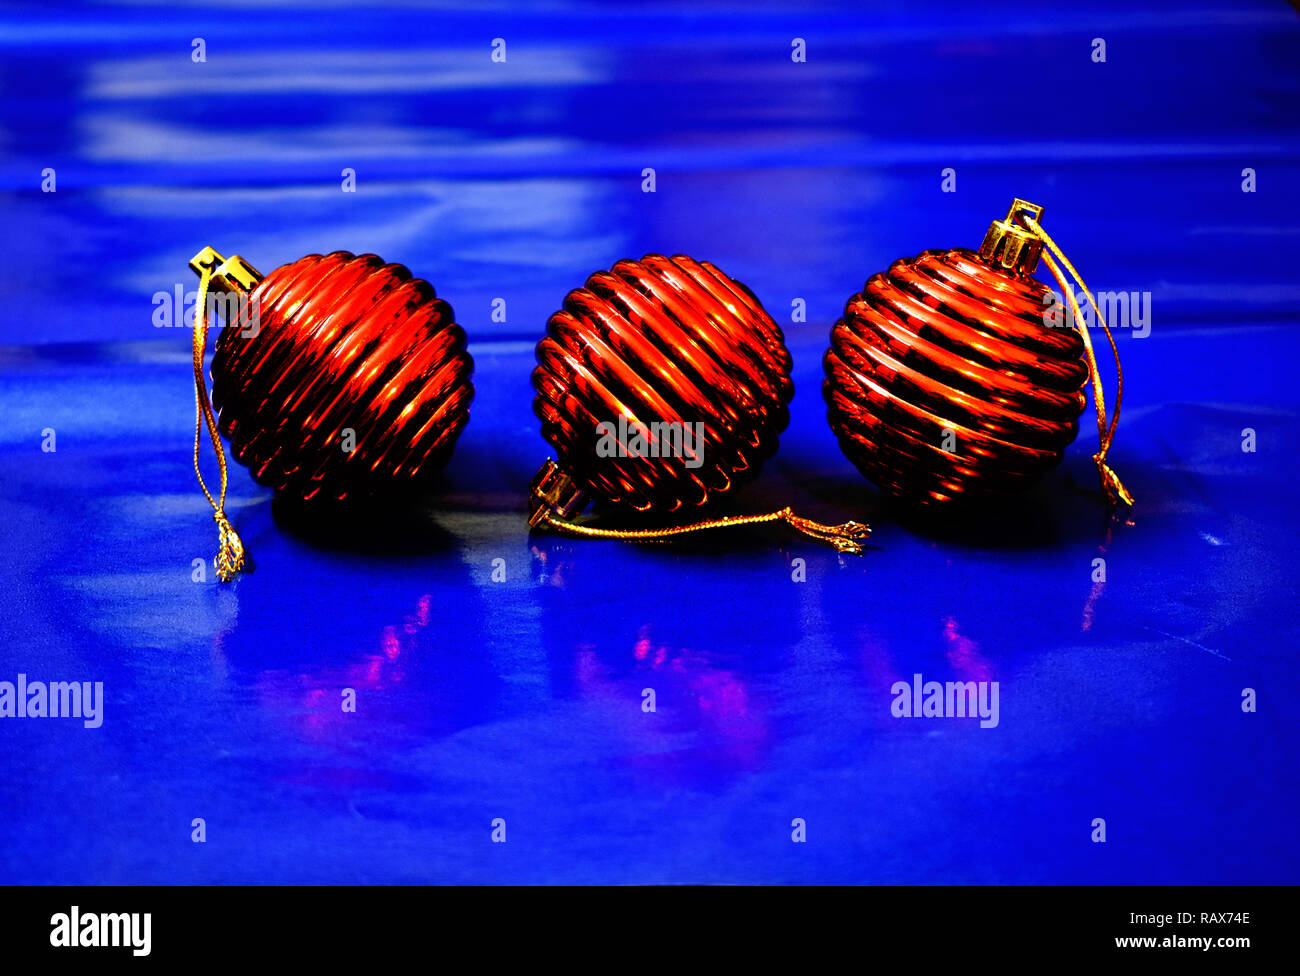 Three red Christmas balls on blue background. Stock Photo